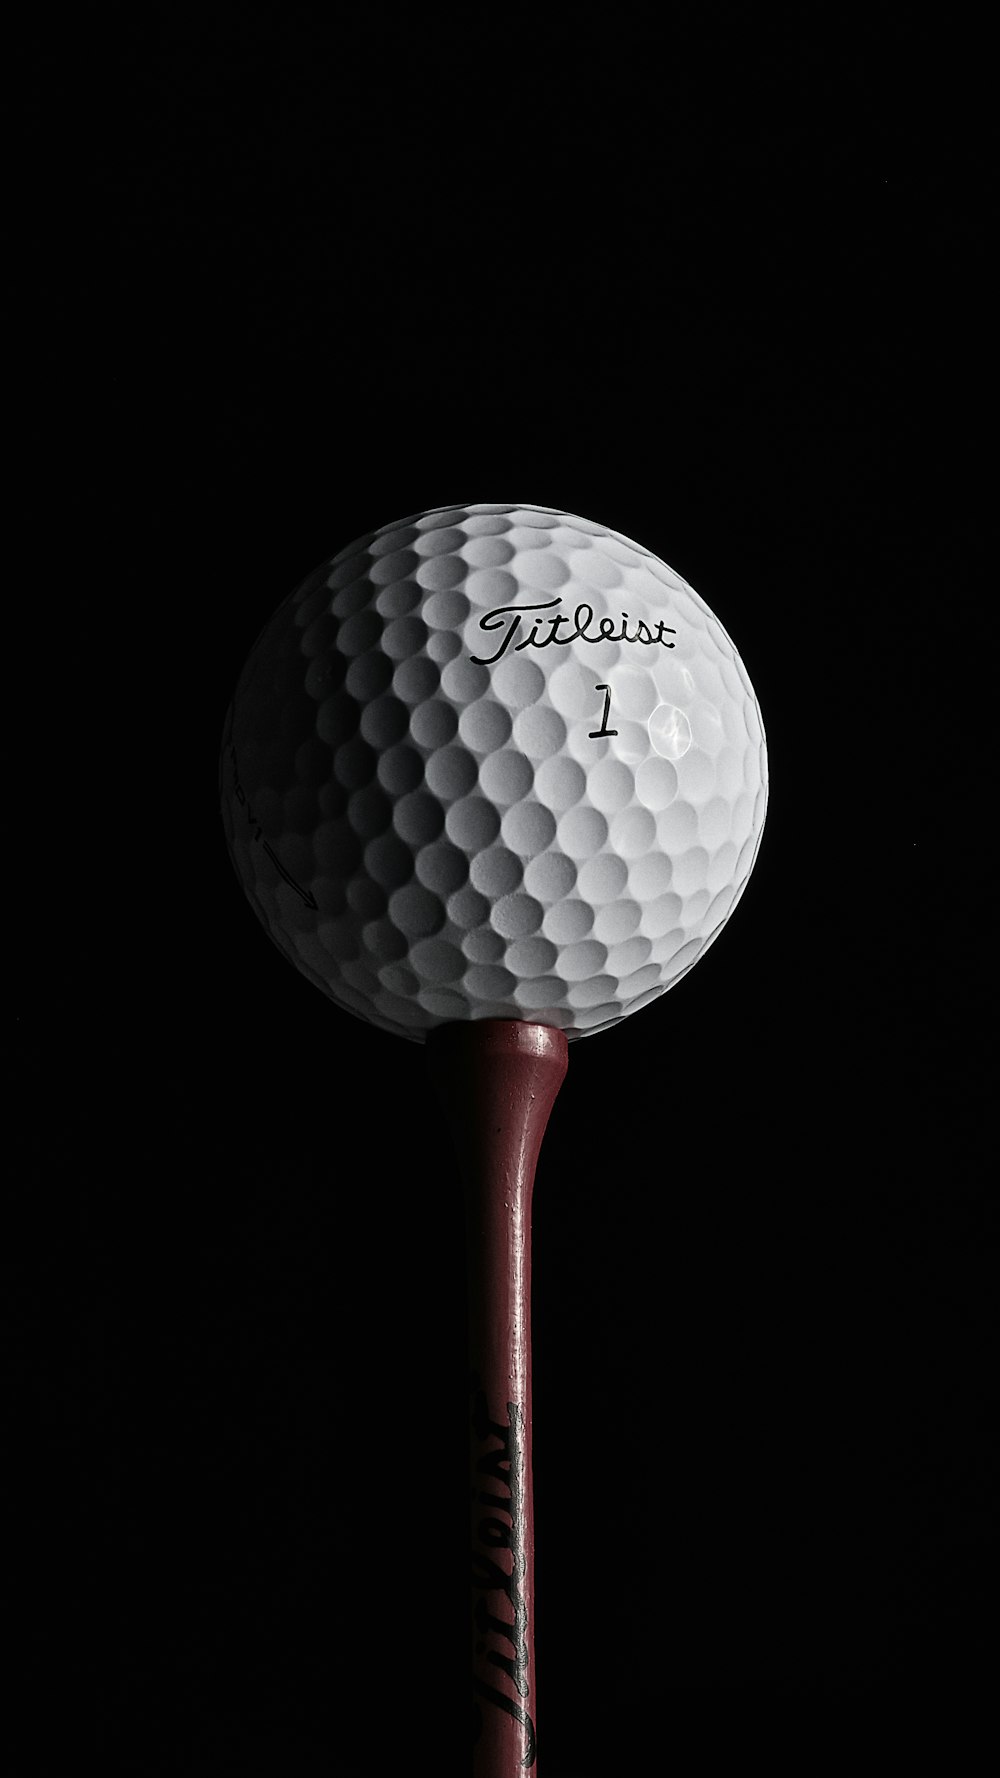 Golf Ball Pictures | Download Free Images & Stock Photos on Unsplash